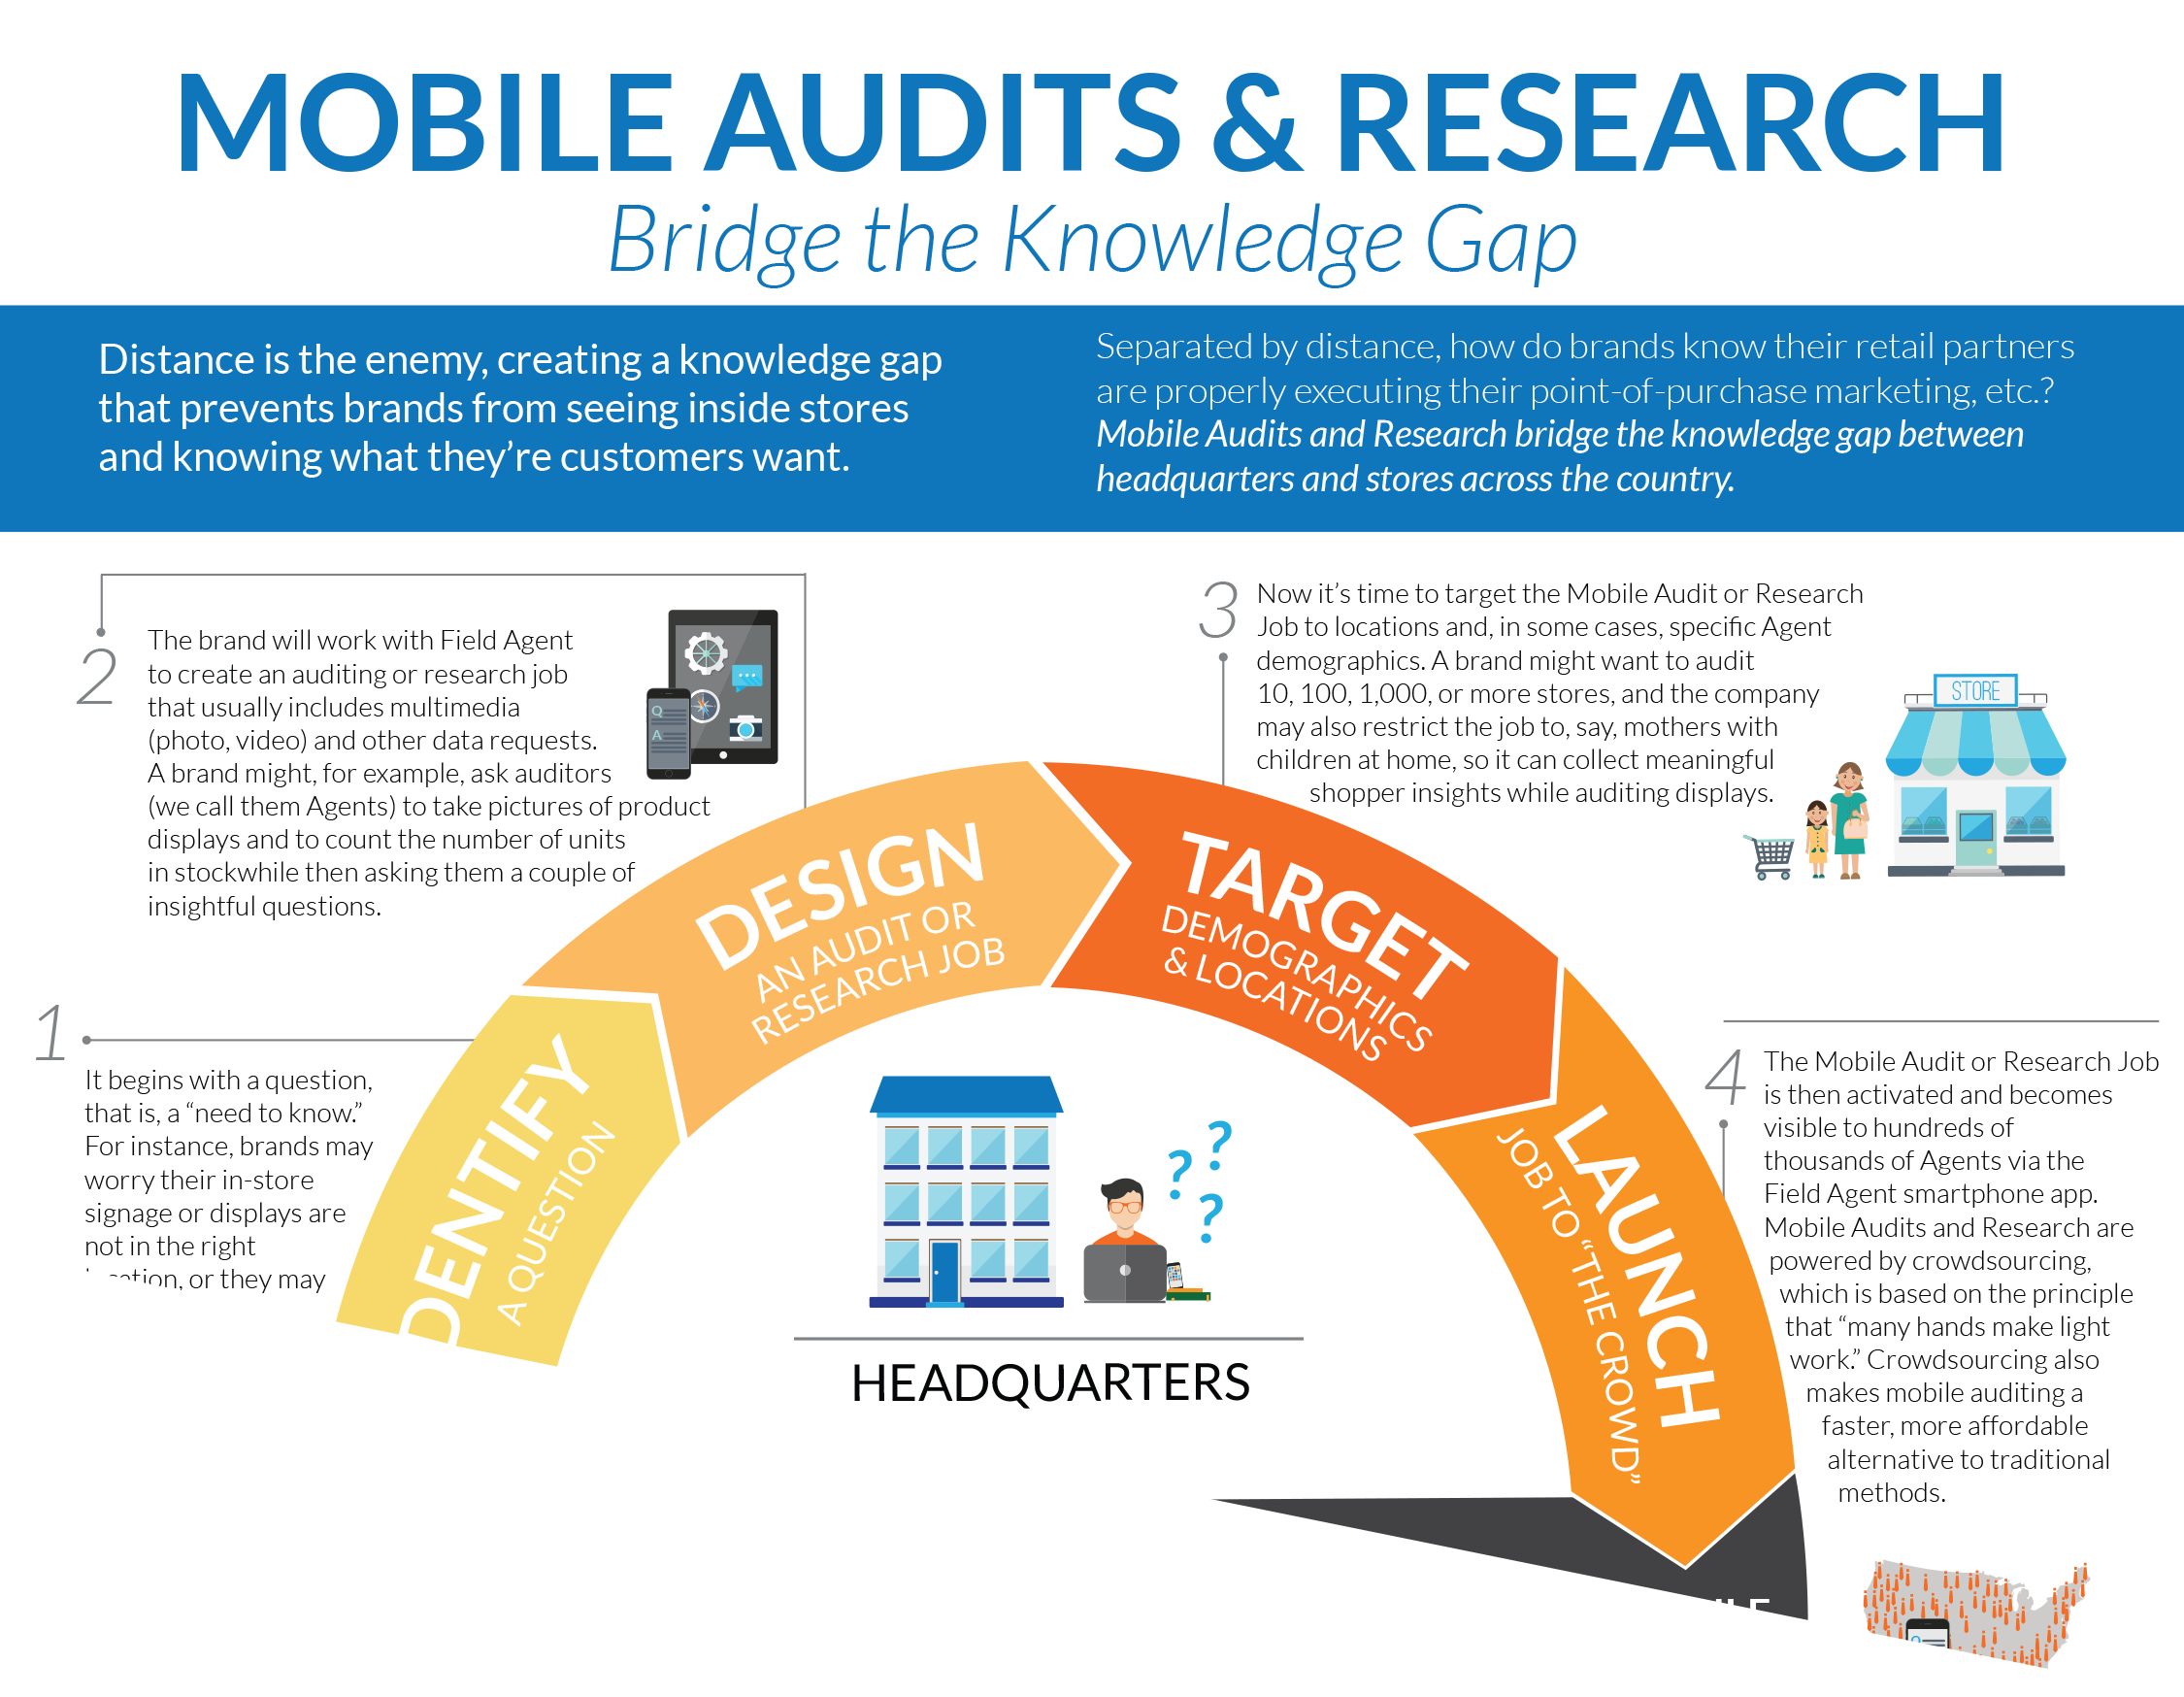 Mobile Audits & Research Bridge the Knowledge Gap Infographic